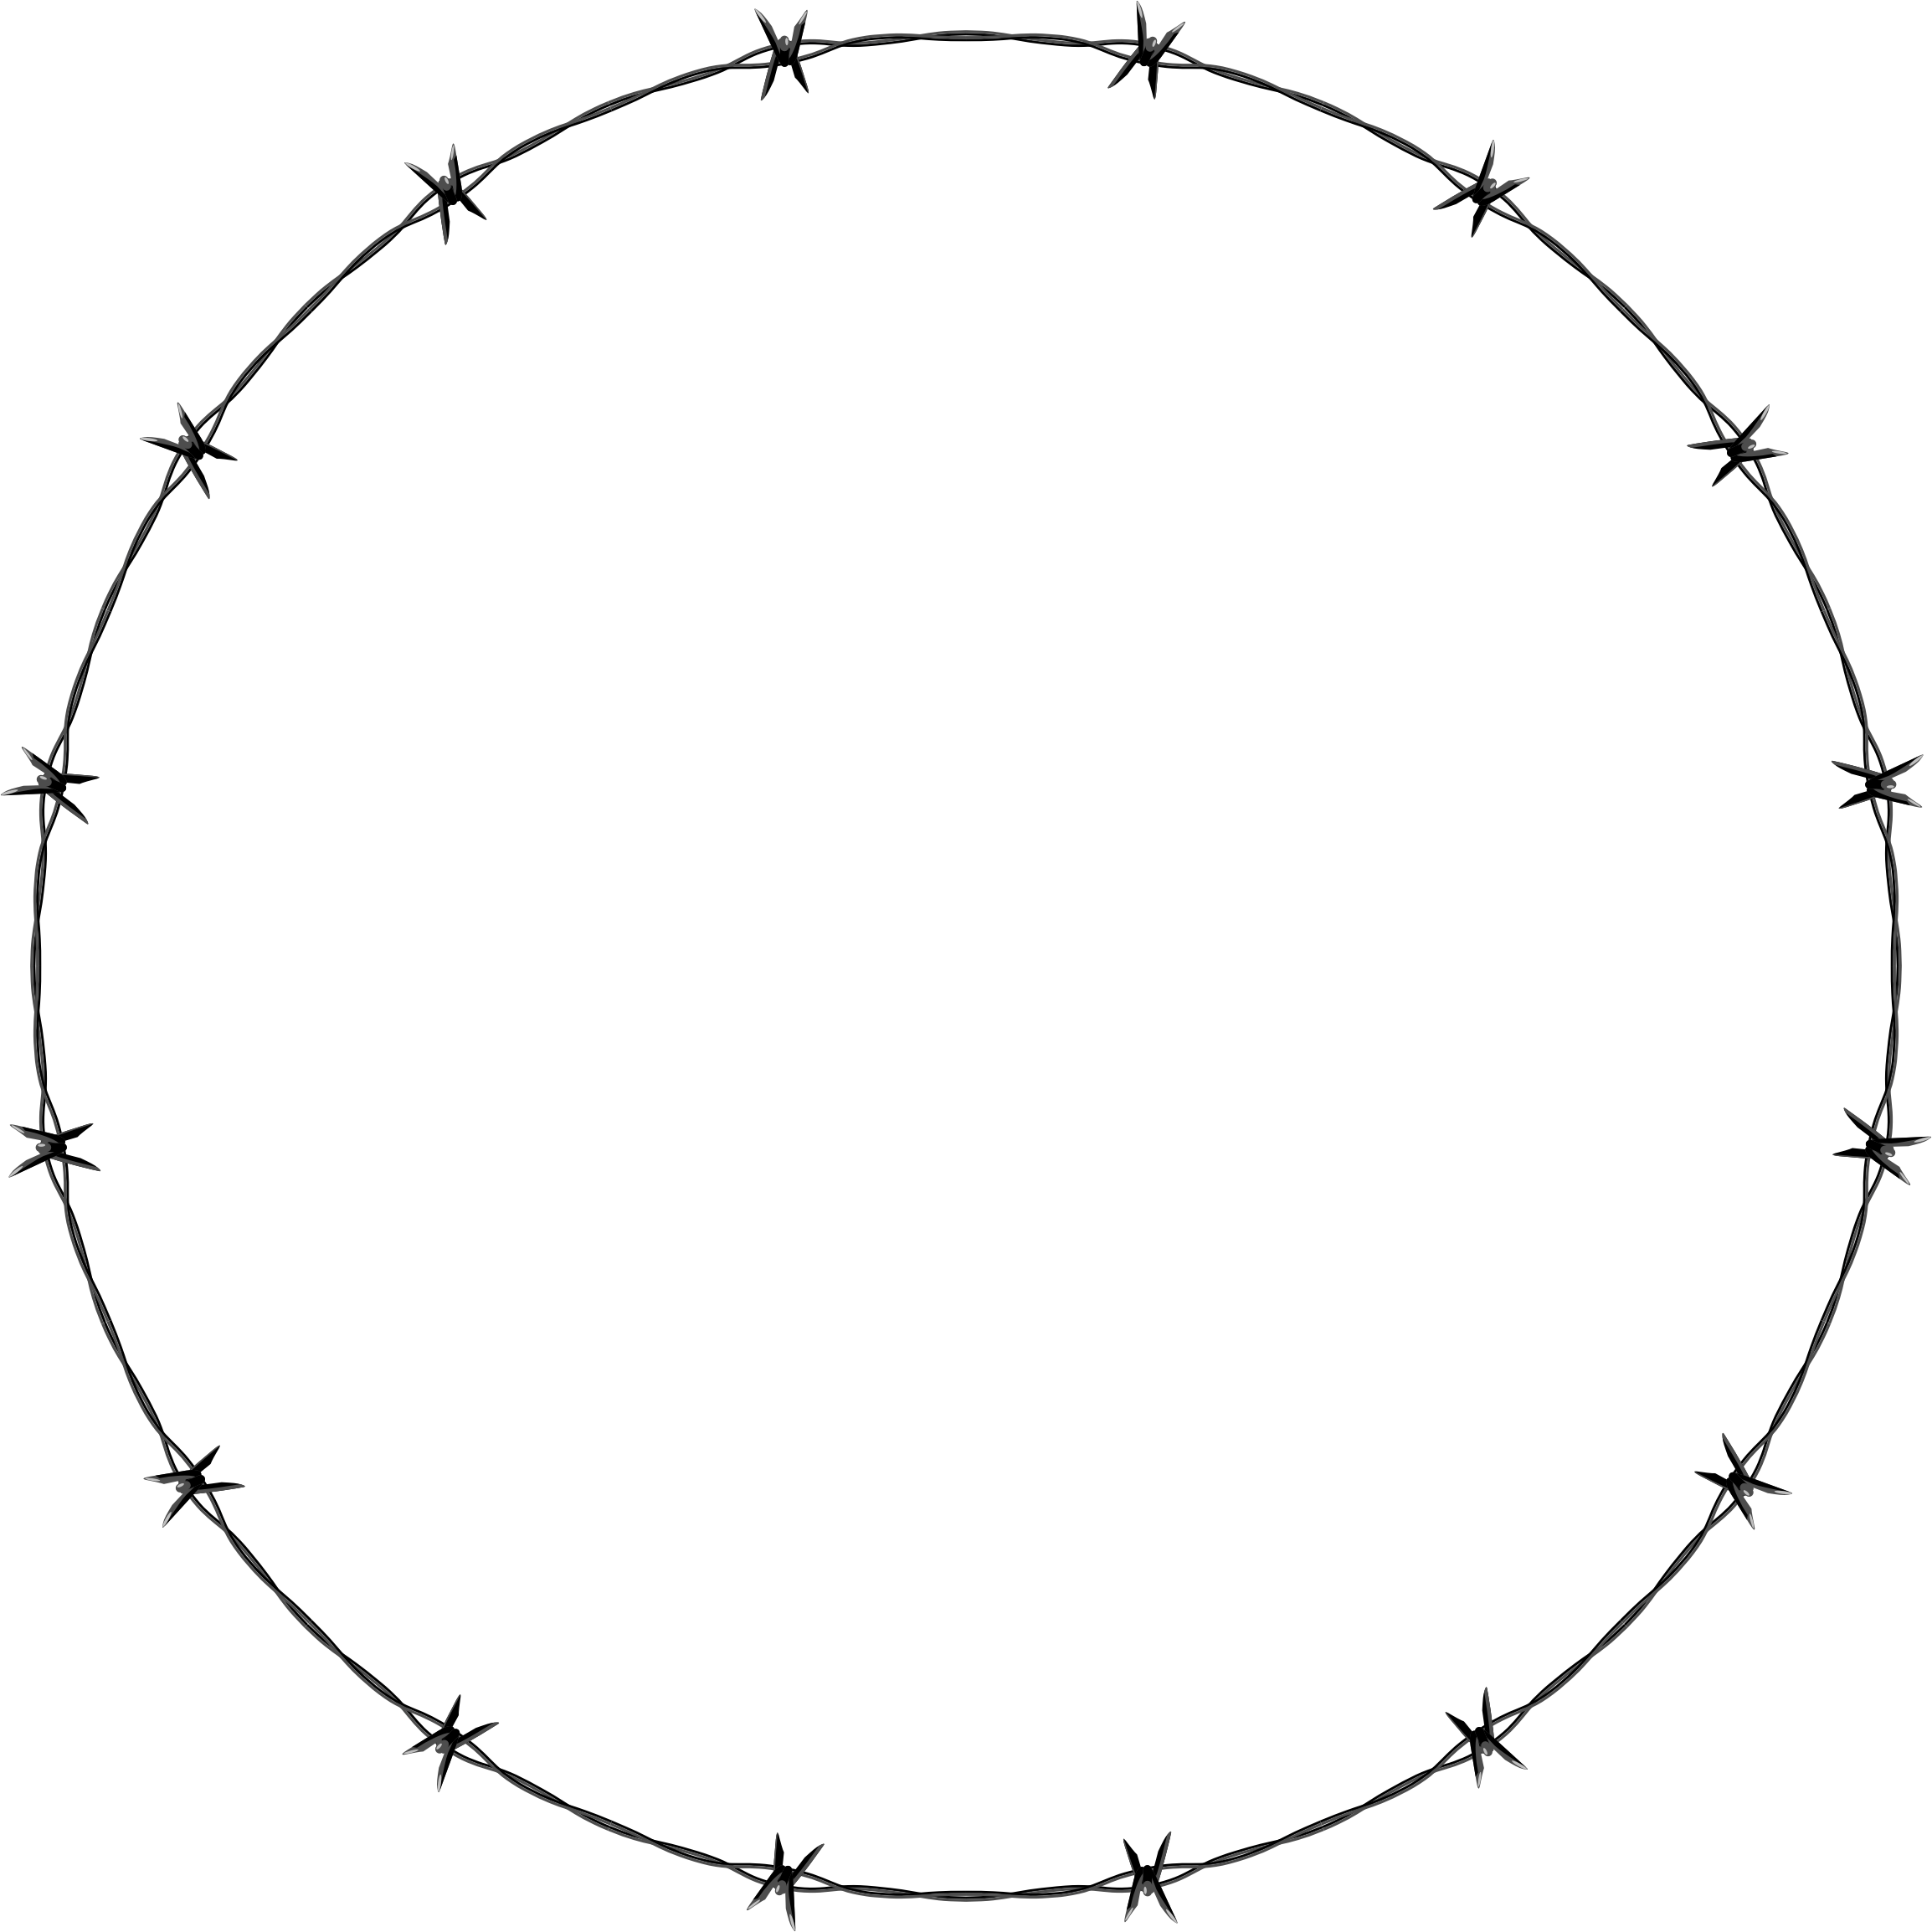 Barbed Wire Circle Frame Border By Gdj